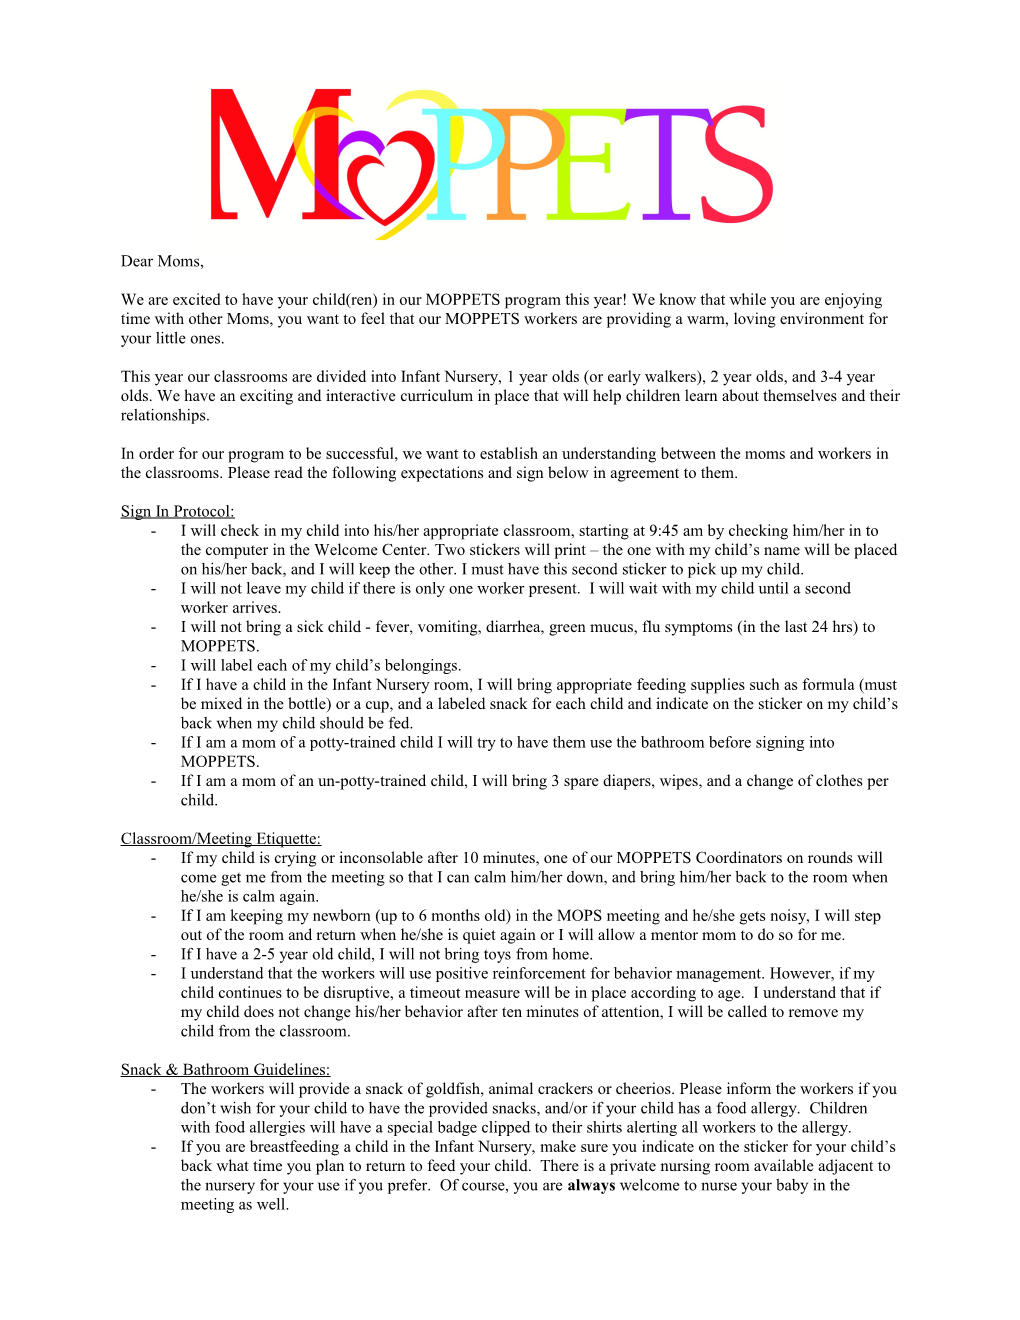 MOPPETS Contract with Parents